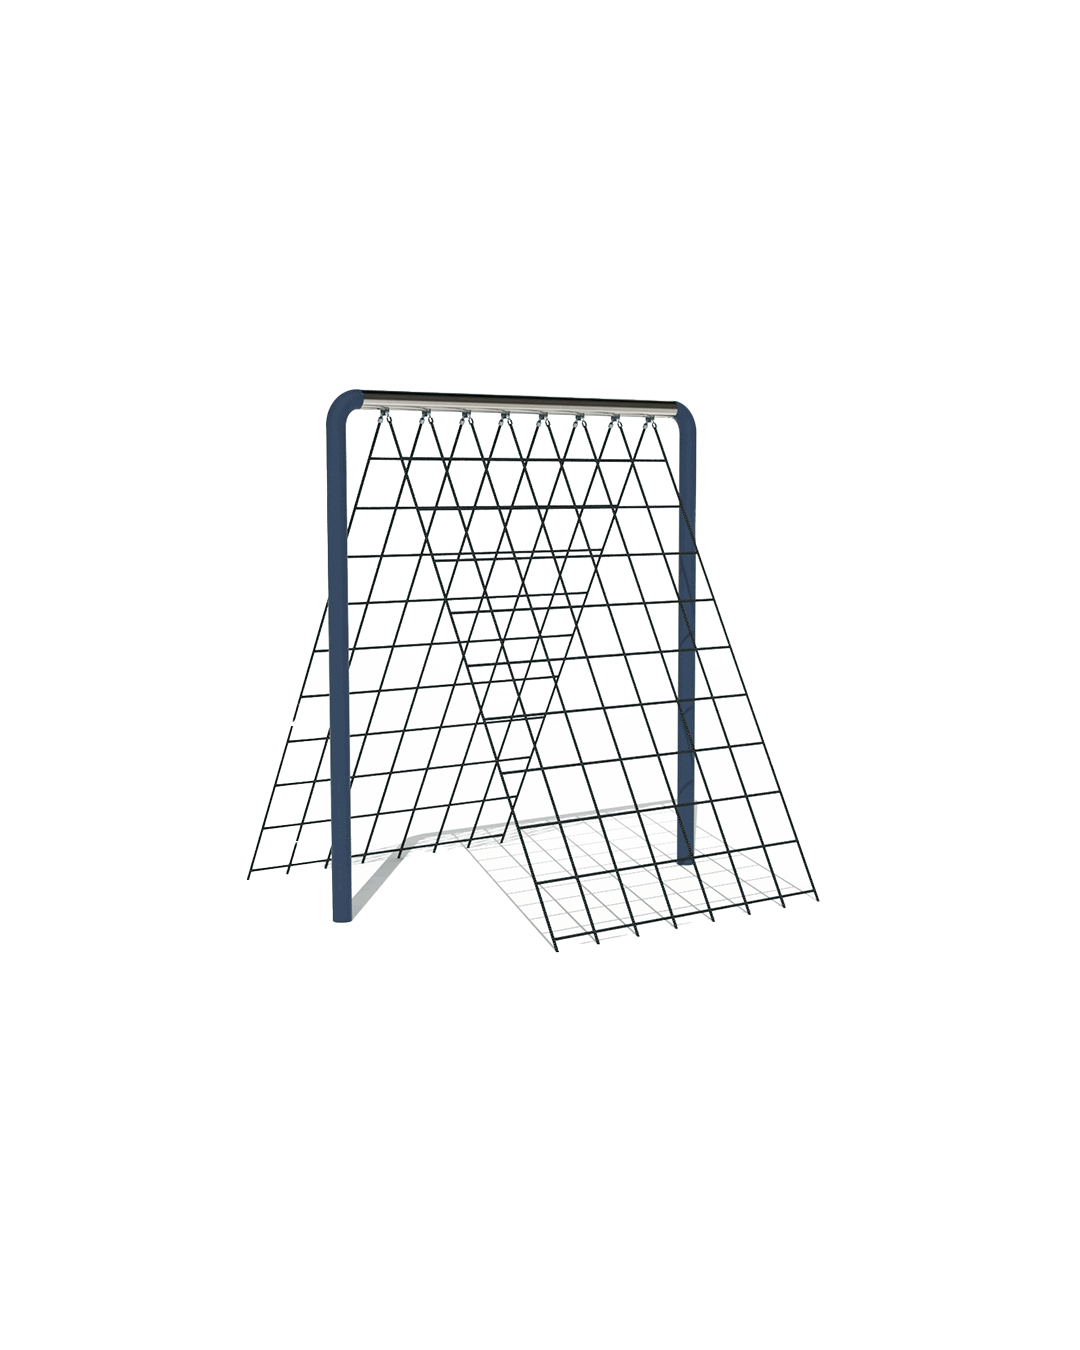 Spider web obstacle for outdoor training